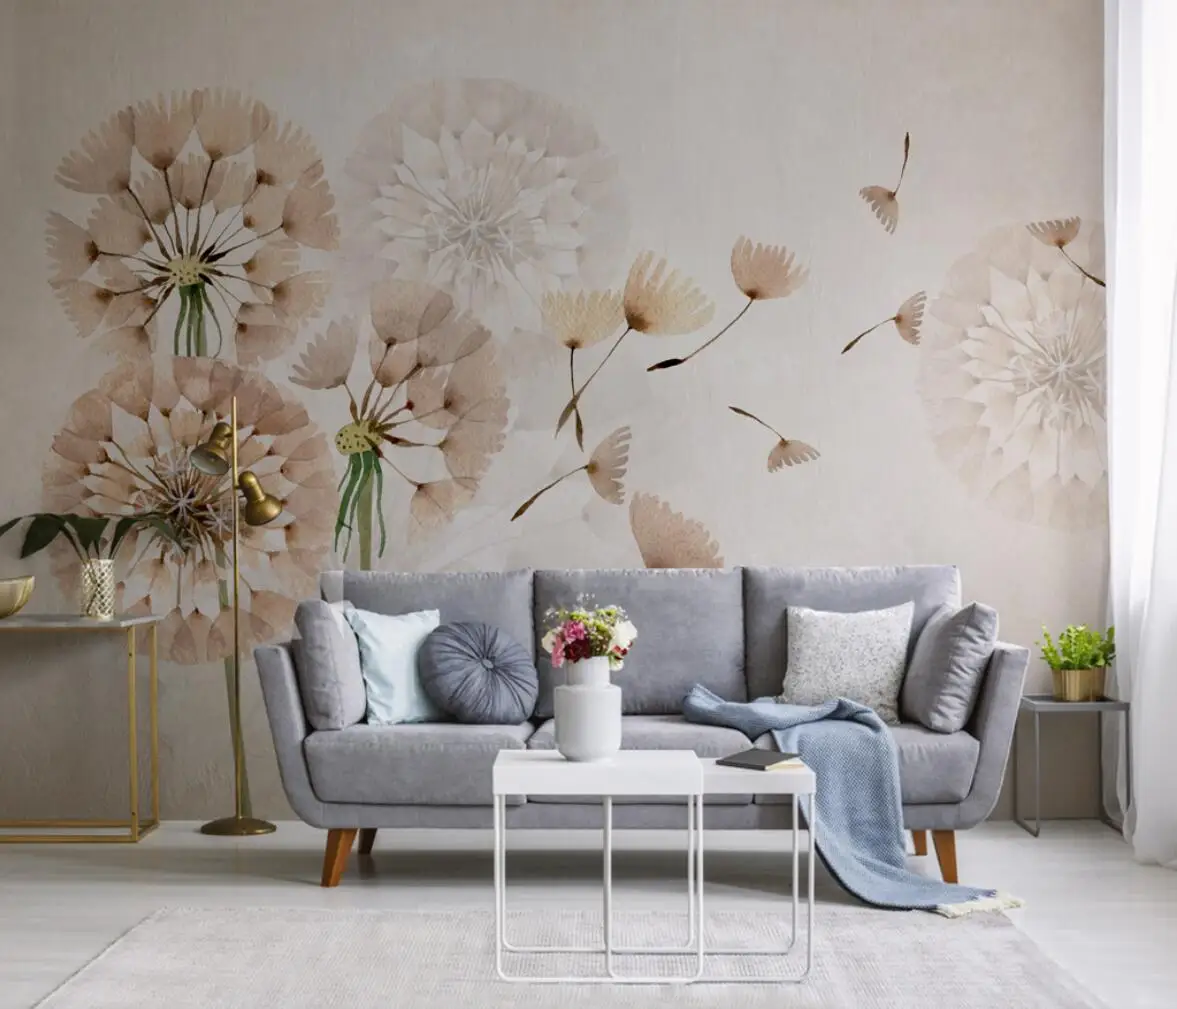 Custom papel de parede 3D Mural Wallpaper Oil Painting TV Background Wall Papers Home Decor wallpapers for Living Room Bedroom custom european oil painting flower wallpapers for living room decorationtv sofa background 3d wall painting bedroom decoration